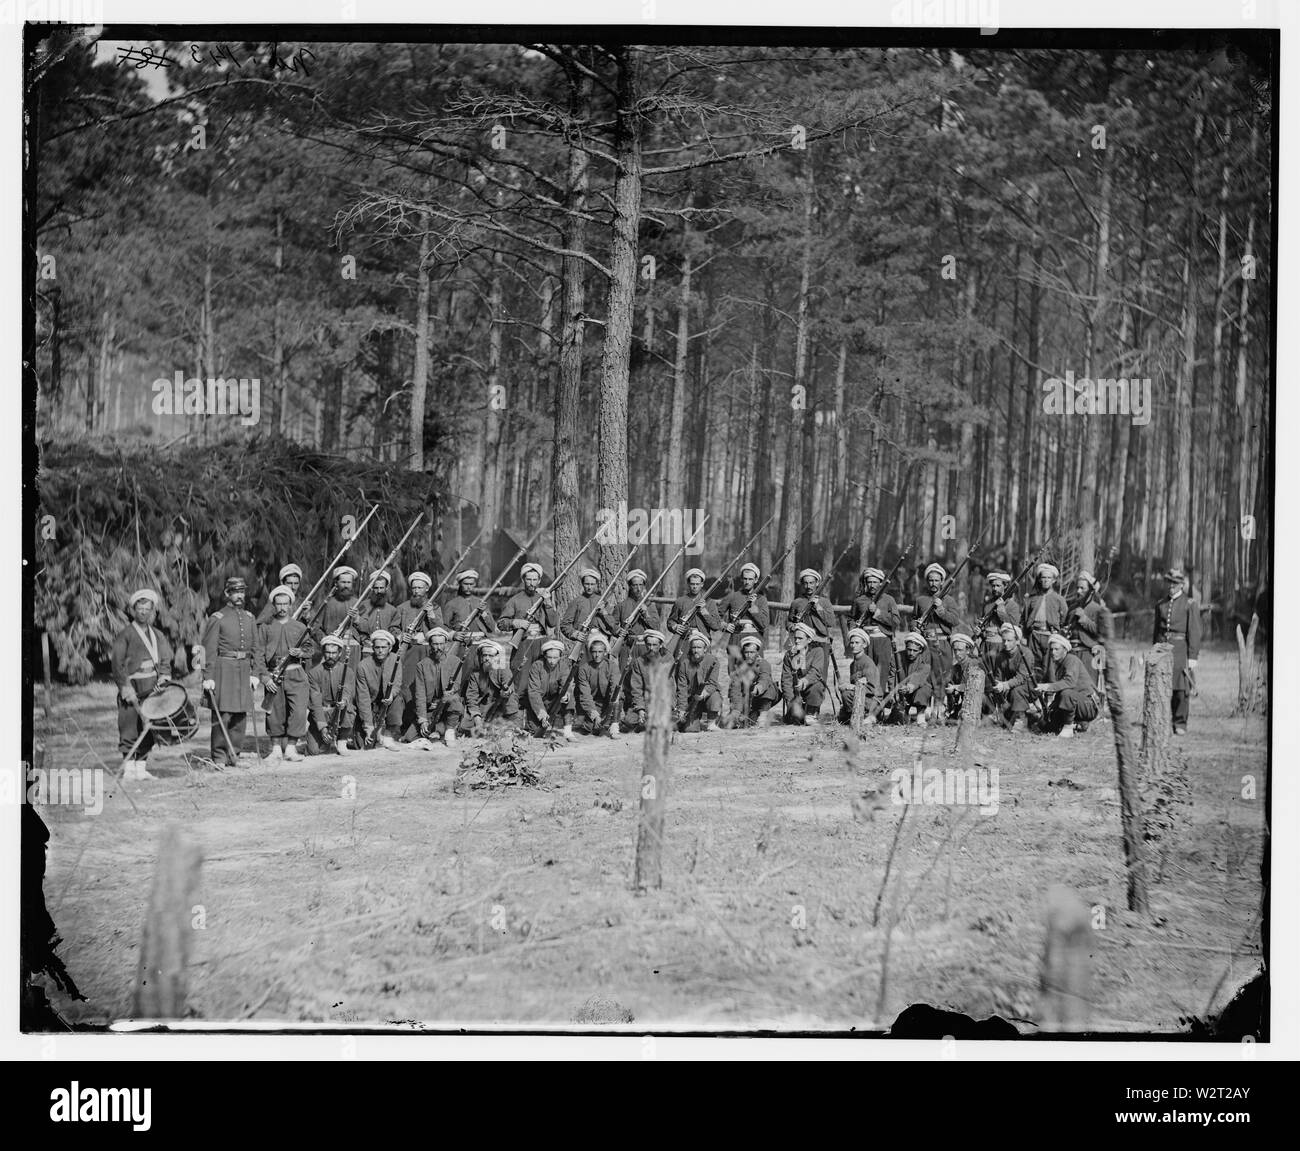 Petersburg, Va. Company F, 114th Pennsylvania Infantry (Zouaves) with fixed bayonets; Photograph of the main eastern theater of war, the siege of Petersburg, June 1864-April 1865. Stock Photo